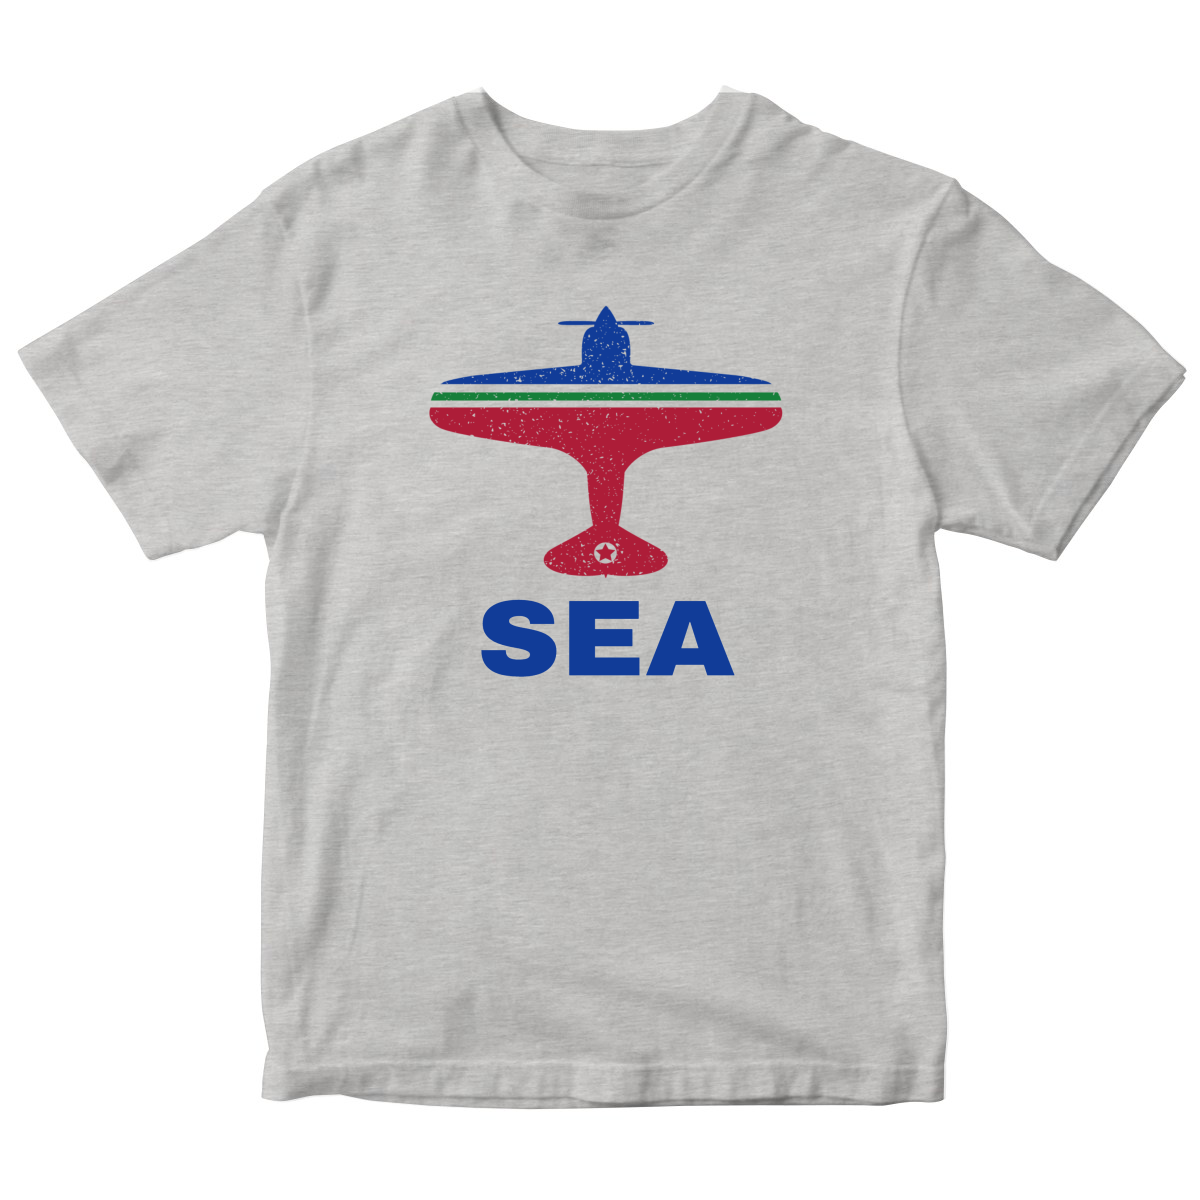 Fly Seattle SEA Airport Kids T-shirt | Gray